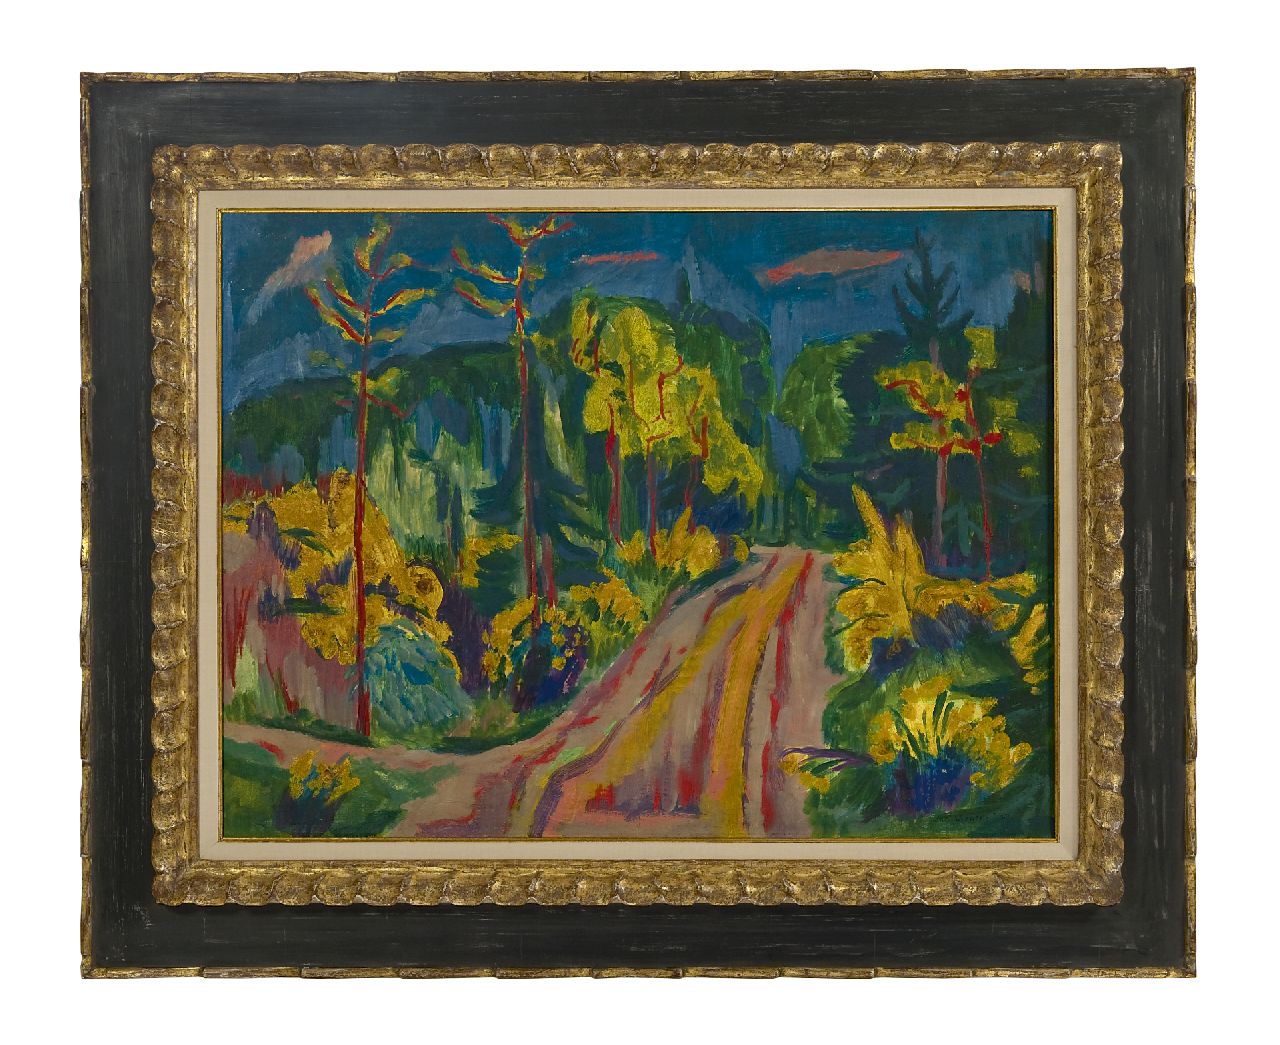 Wiegers J.  | Jan Wiegers, Mountainous landscape, wax paint on canvas 52.2 x 68.3 cm, signed l.r. and painted '27